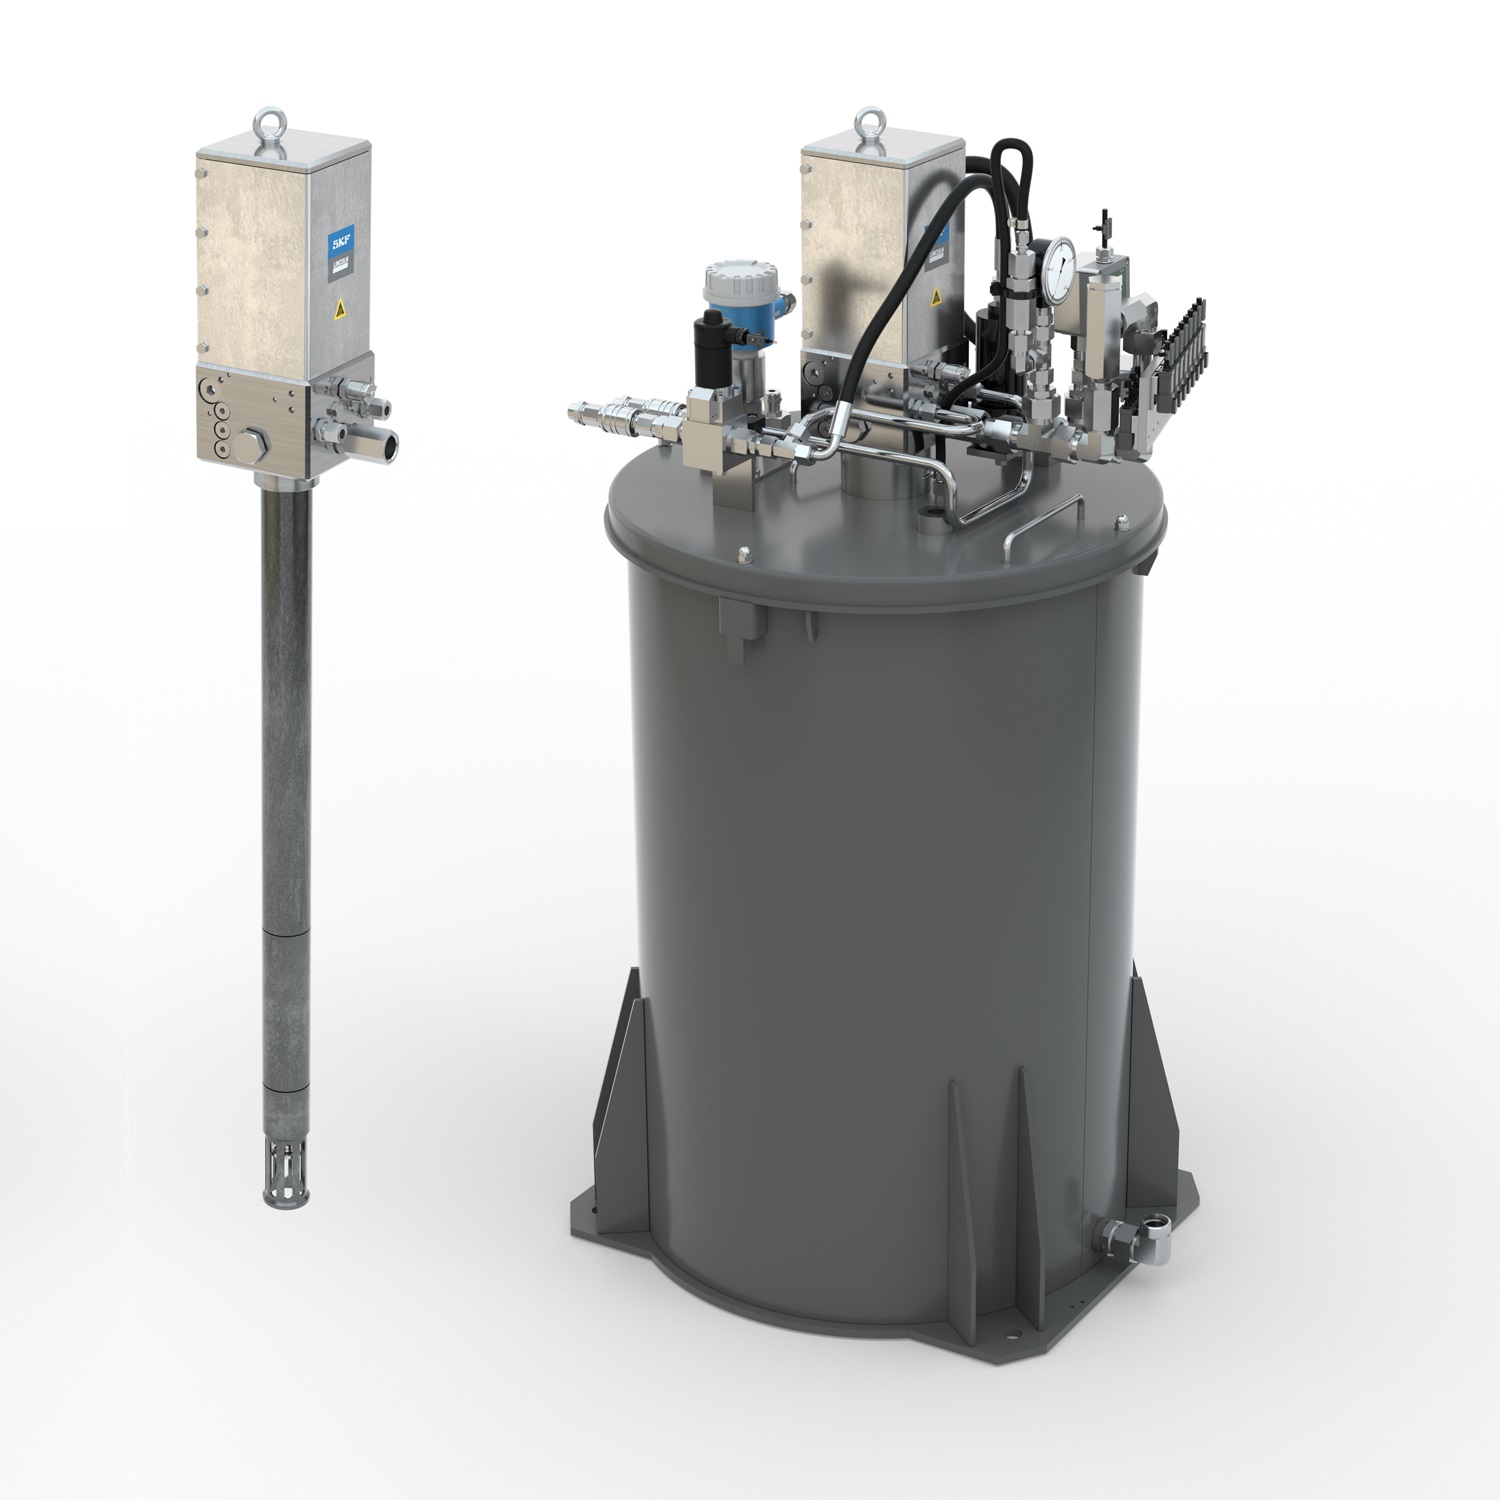 The BPH30 is designed for large automatic lubrication systems and filling processes.